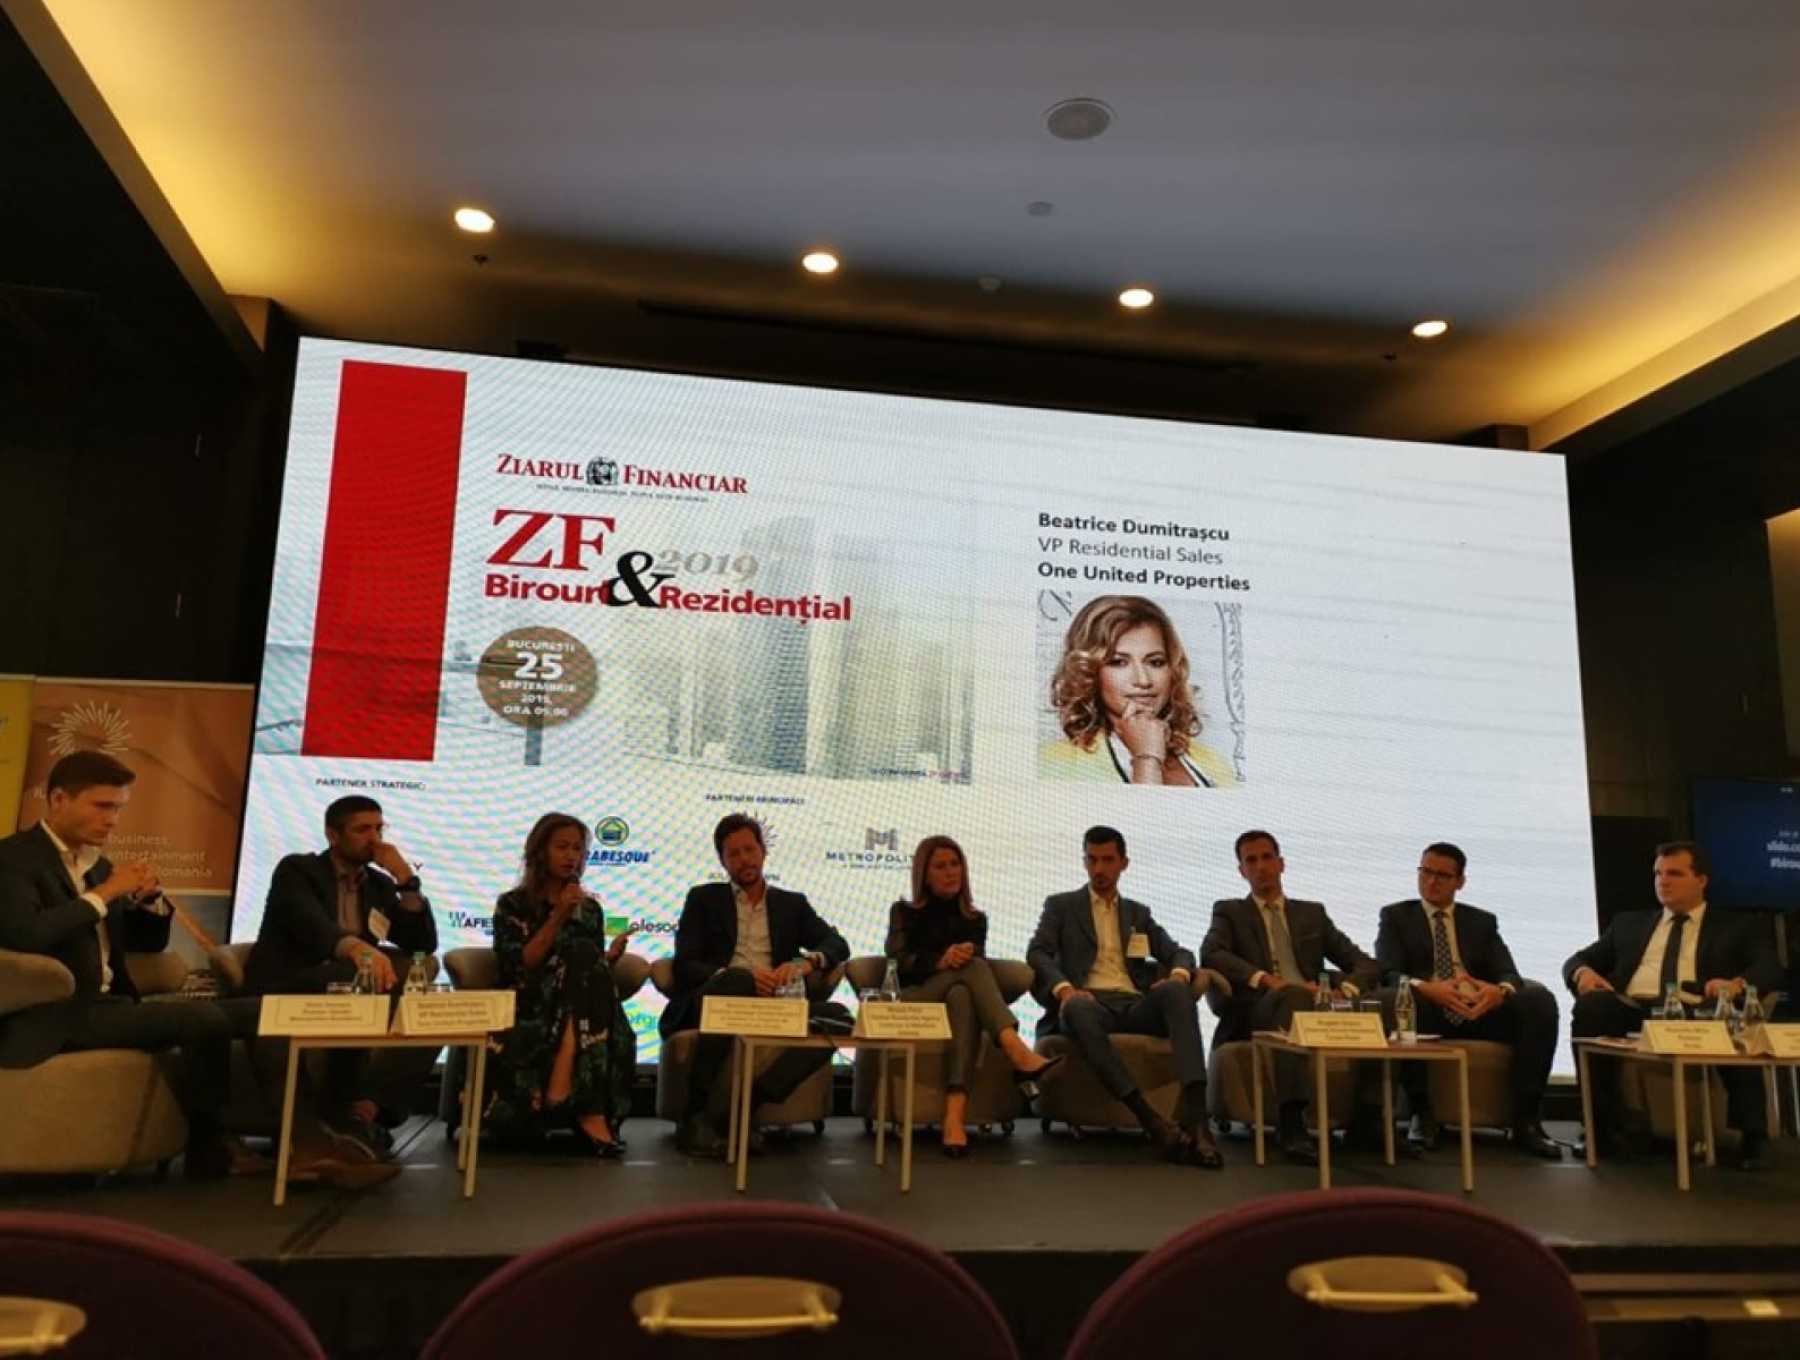 Beatrice Dumitrașcu at ZF Offices and Residential Conference